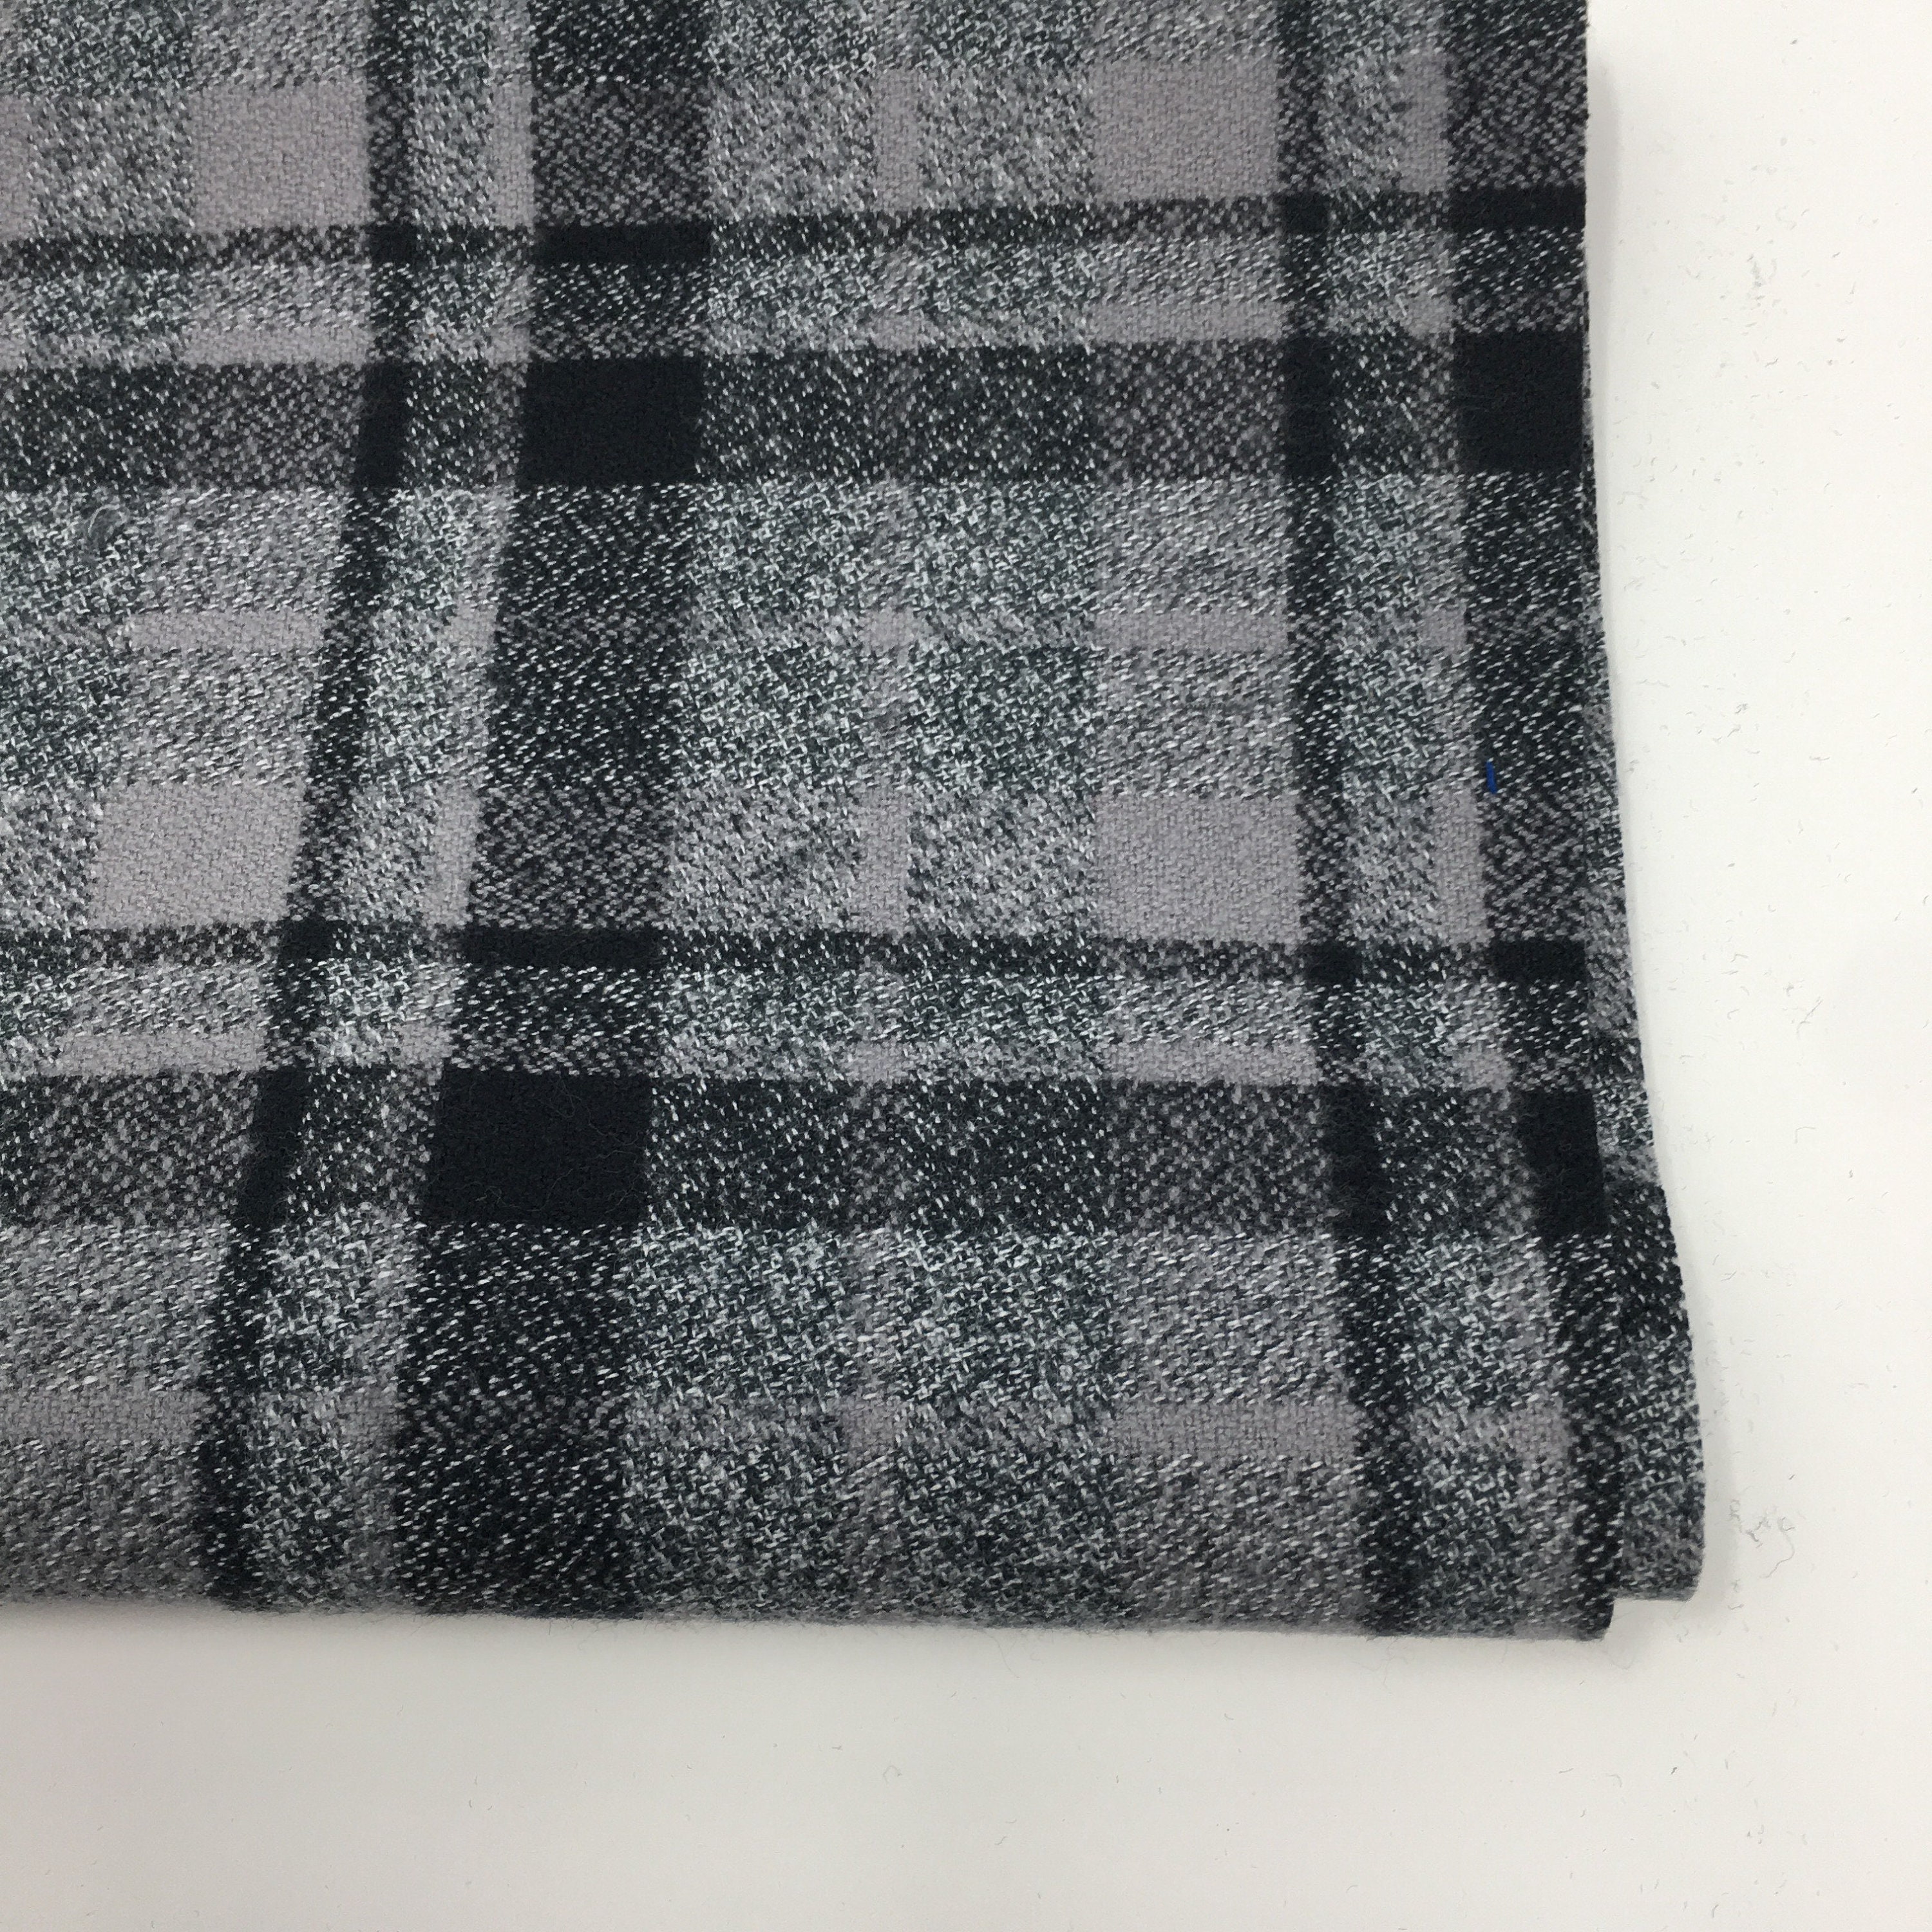 Flannel fabric Woven black and gray Mammoth Plaid Flannel by | Etsy